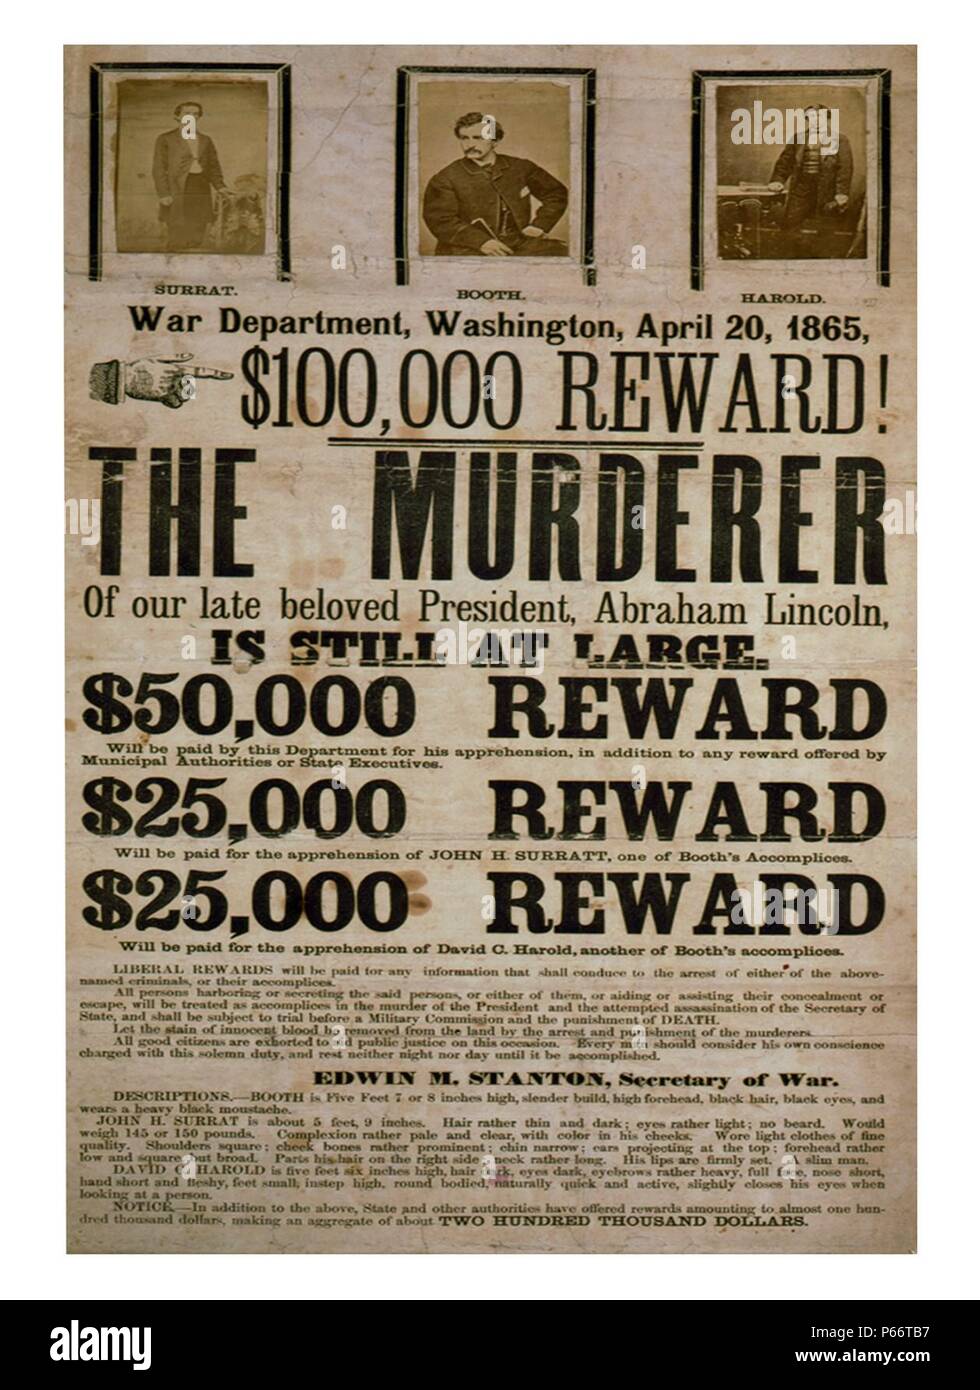 $100,000 reward! The murderer of our late beloved President, Abraham Lincoln, is still at large. Published: 1865. Broadside advertising reward for capture of Lincoln assassination conspirators, illustrated with photographic prints of John H. Surratt, John Wilkes Booth, and David E. Herold. Stock Photo